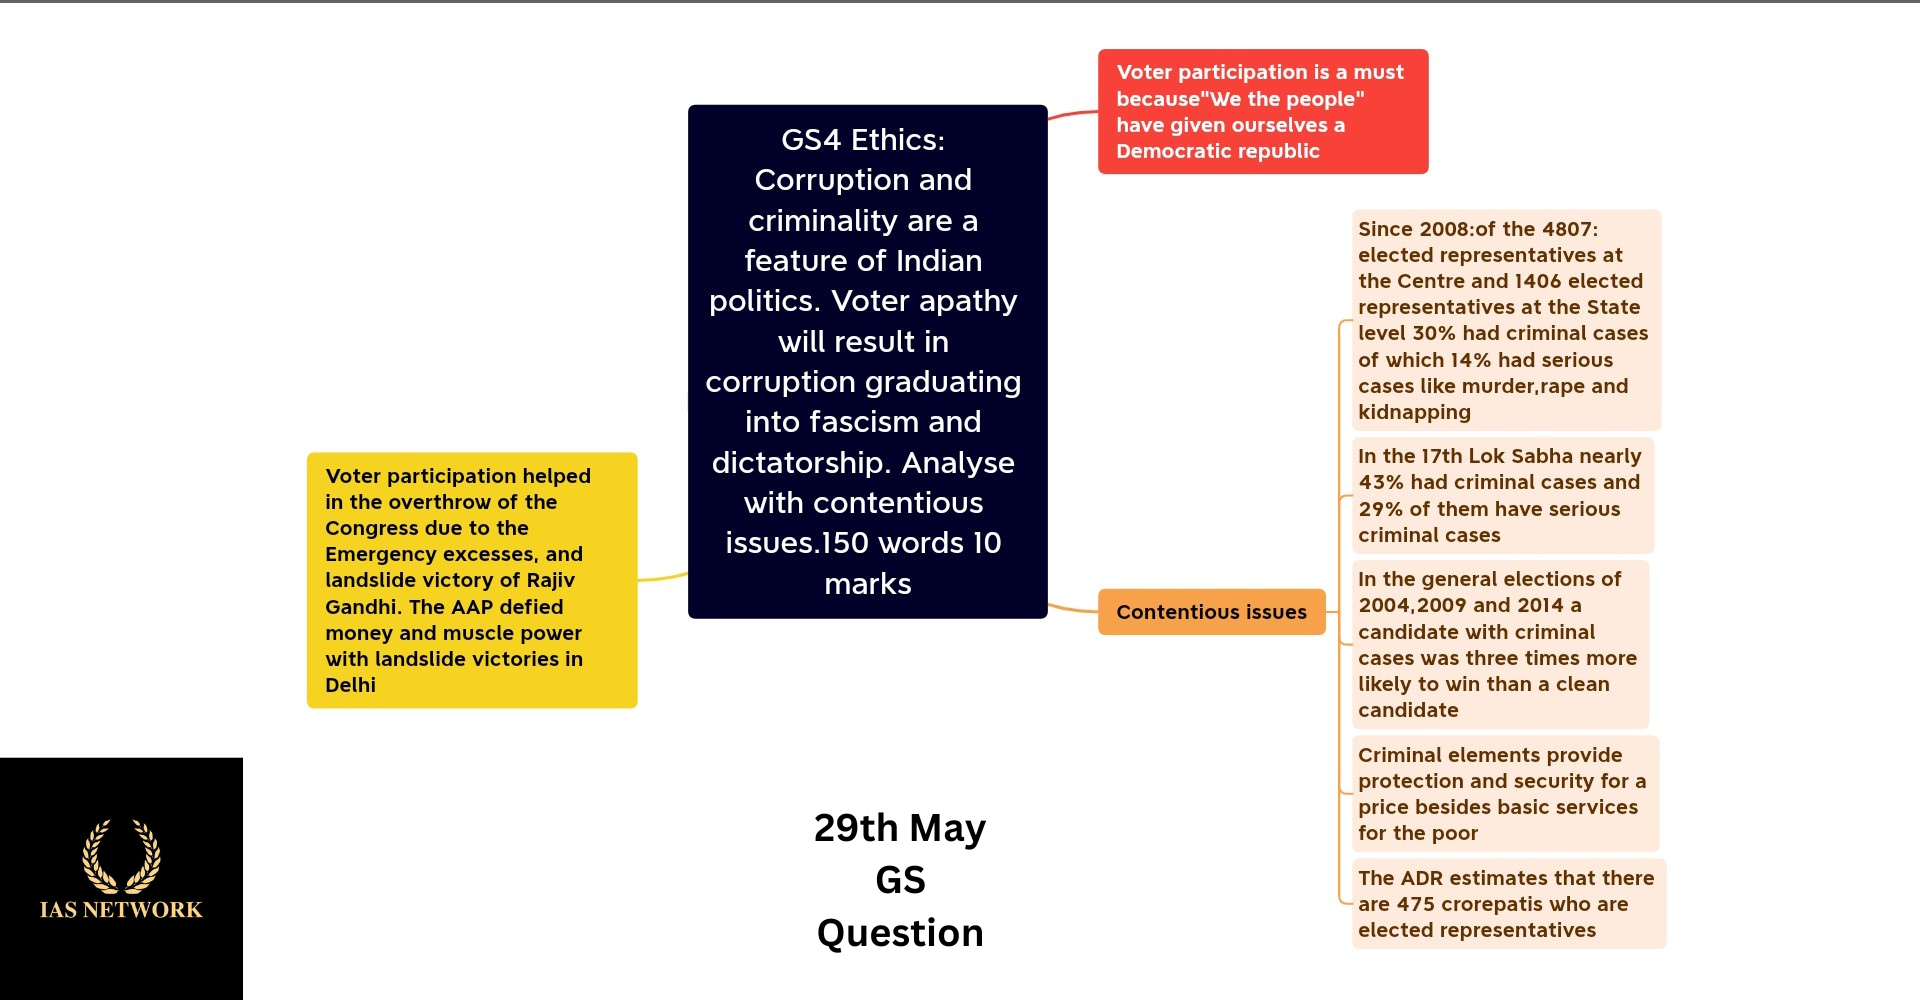 IAS NETWORK 29th MAY GS QUESTION